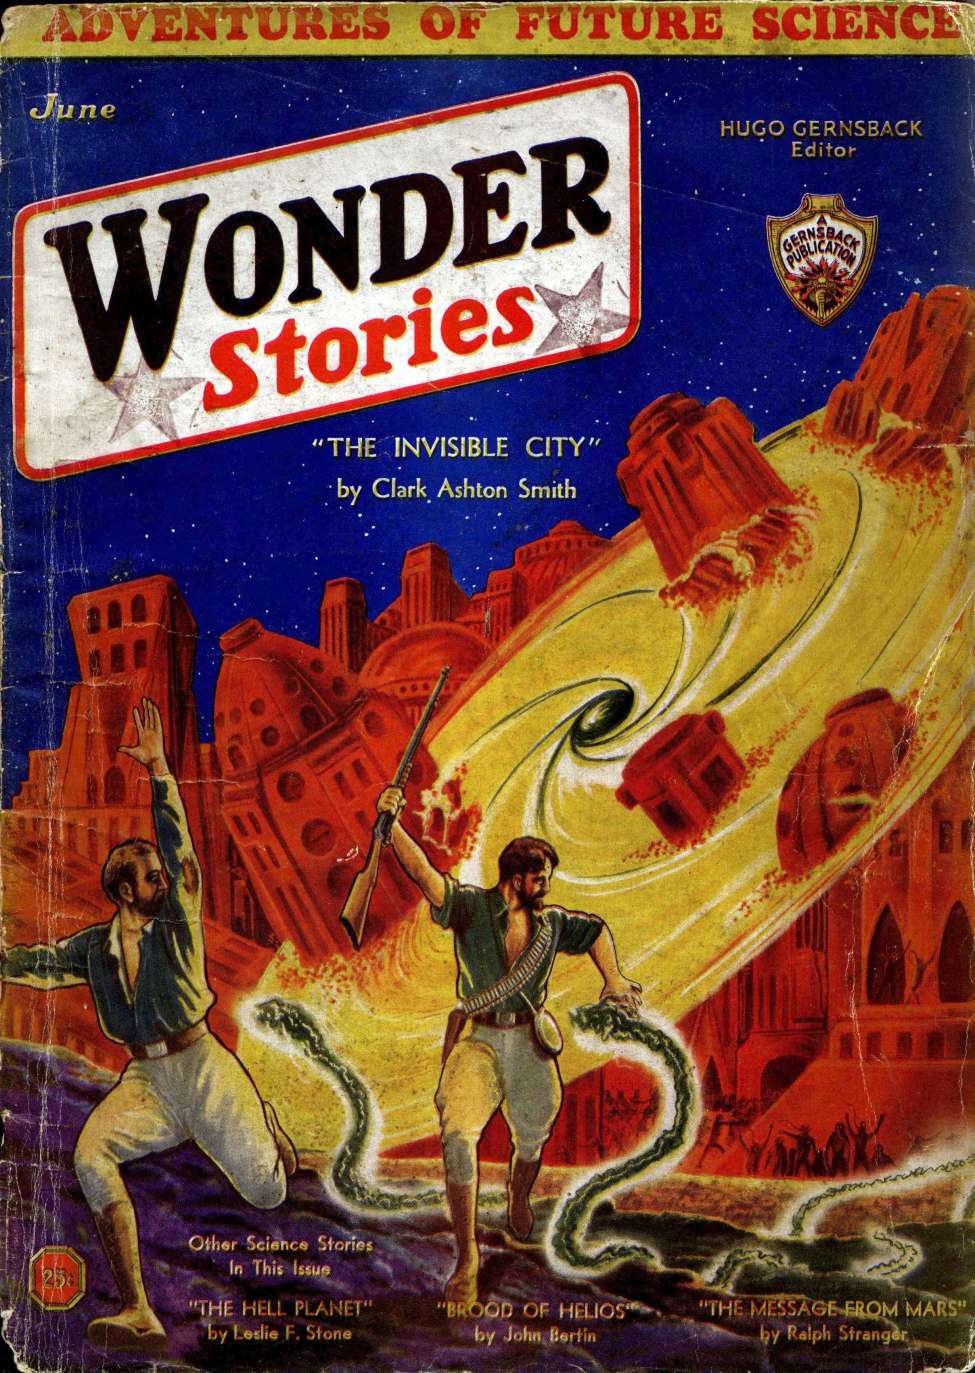 Comic Book Cover For Wonder Stories v4 1 - The Invisible City - Clark Ashton Smith